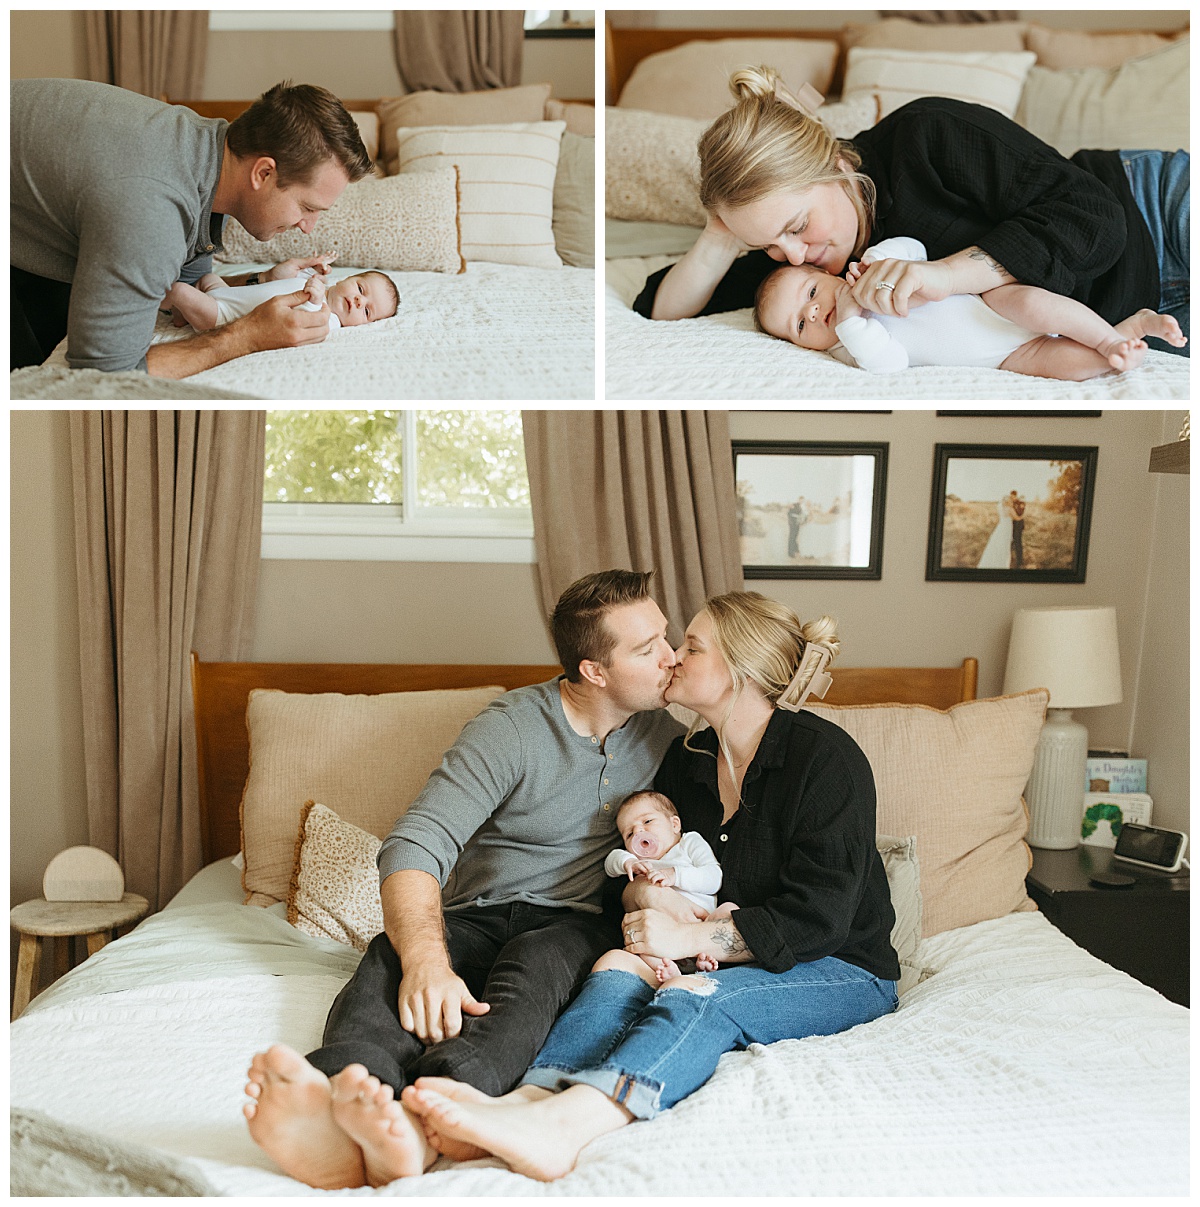 new parents cuddle infant in their bed by Nikki Meer Photography